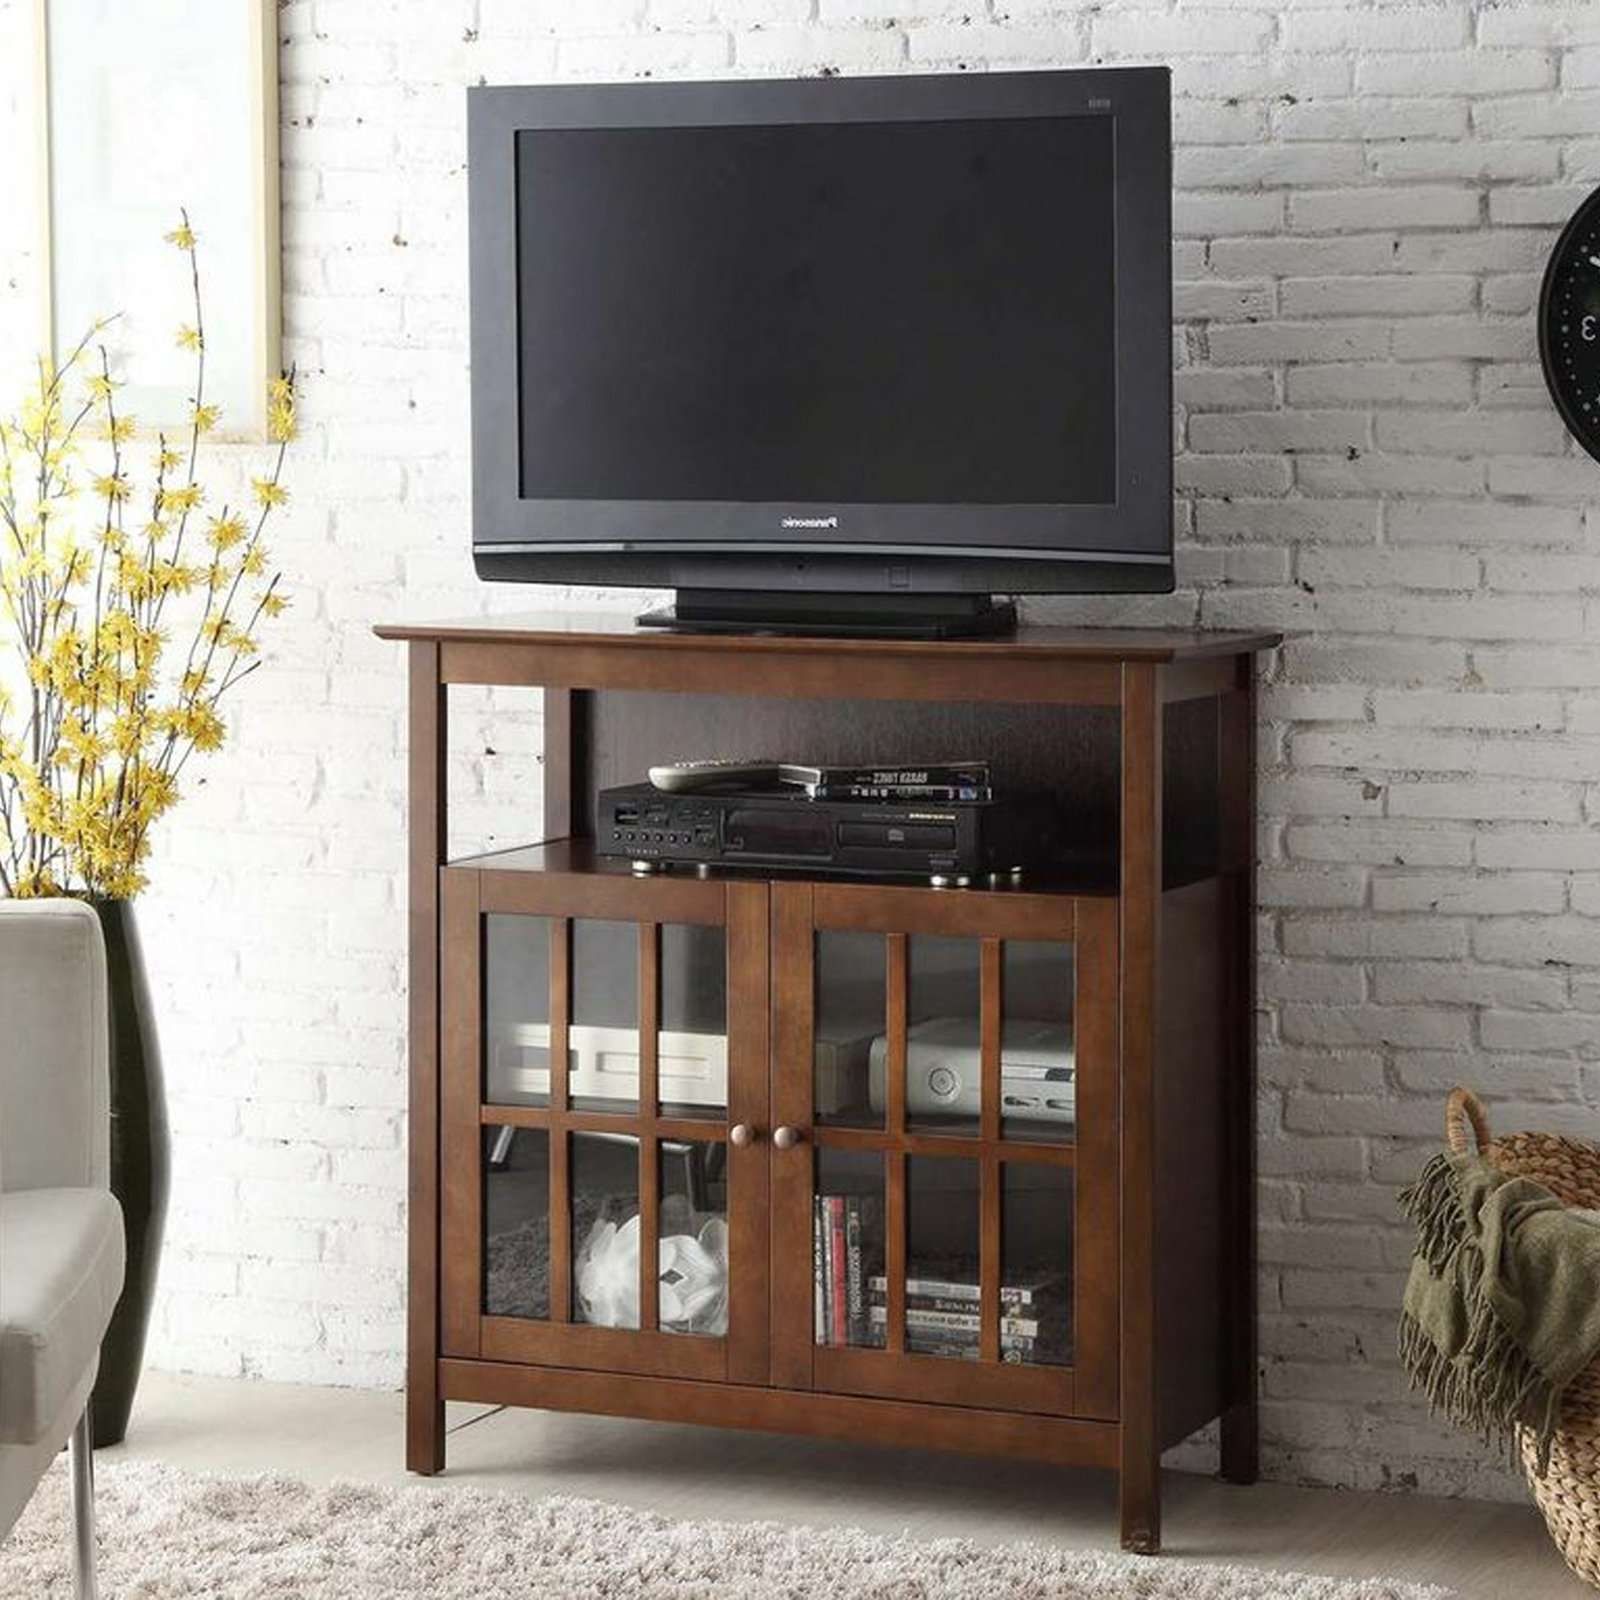 Tv Stand 40 Inches Wide Tags : 31 Striking Tv Stand 40 Inch For Tv Stands 40 Inches Wide (Gallery 1 of 15)